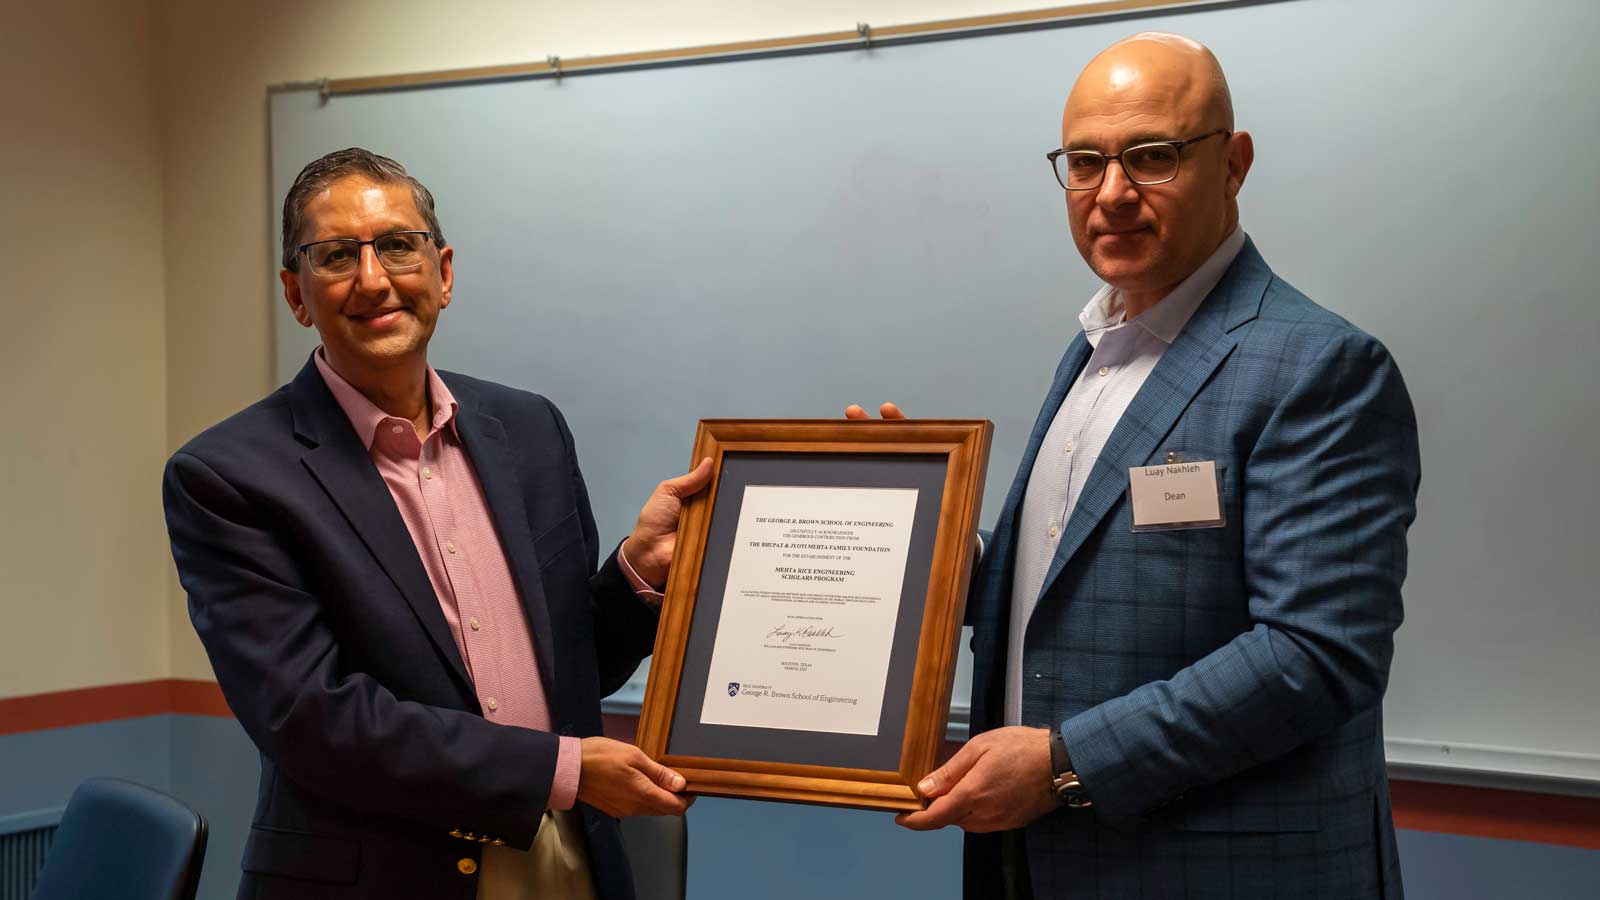 Rahul Mehta and Luah Nakhleh holding a certificate